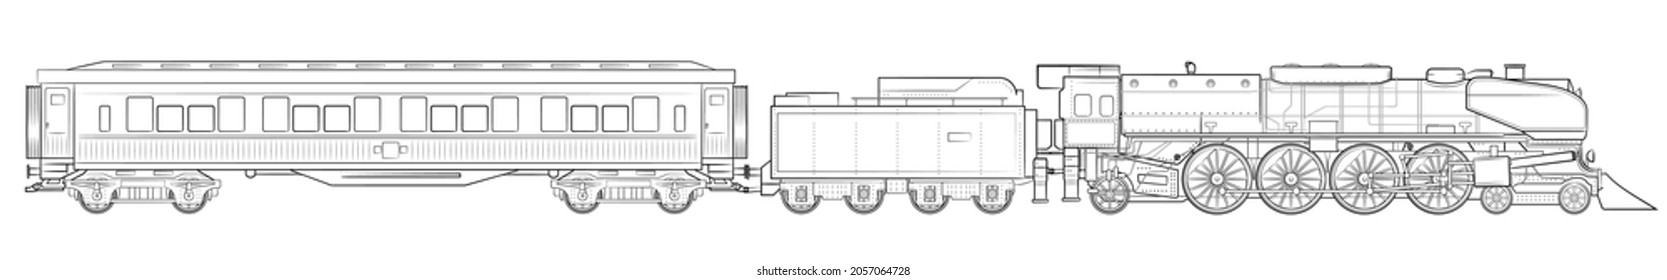 Steam train - illustration of locomotive with tender and railroad sleeping car.